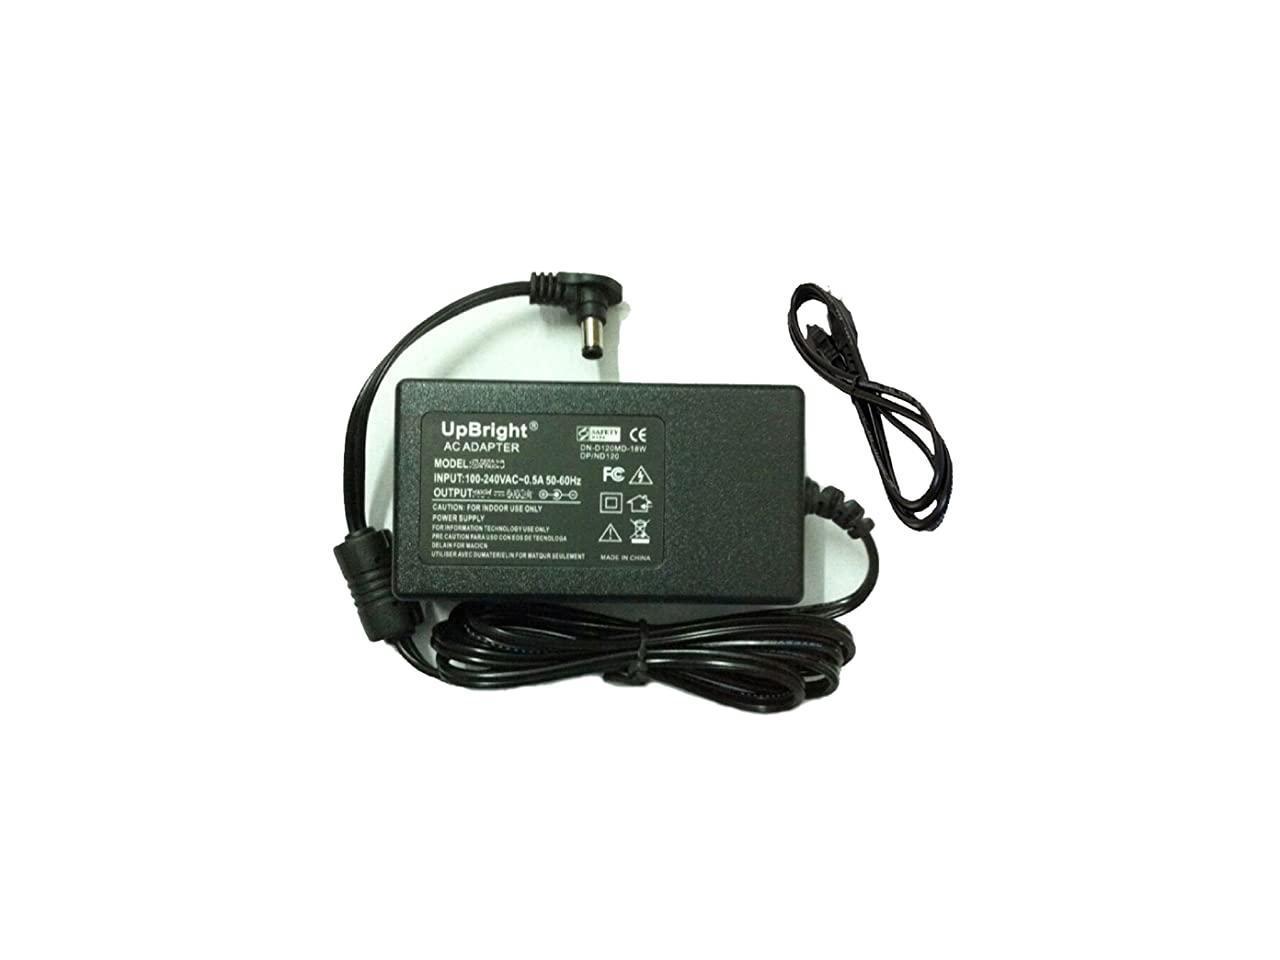 Accessory USA 48V AC DC Adapter for Aastra Telecom M9133i 9133i 480iCT 51i 53i 480i SIP A1700-013-10-05 IP Phone VoIP Telephone 48VDC Power Cord Charger